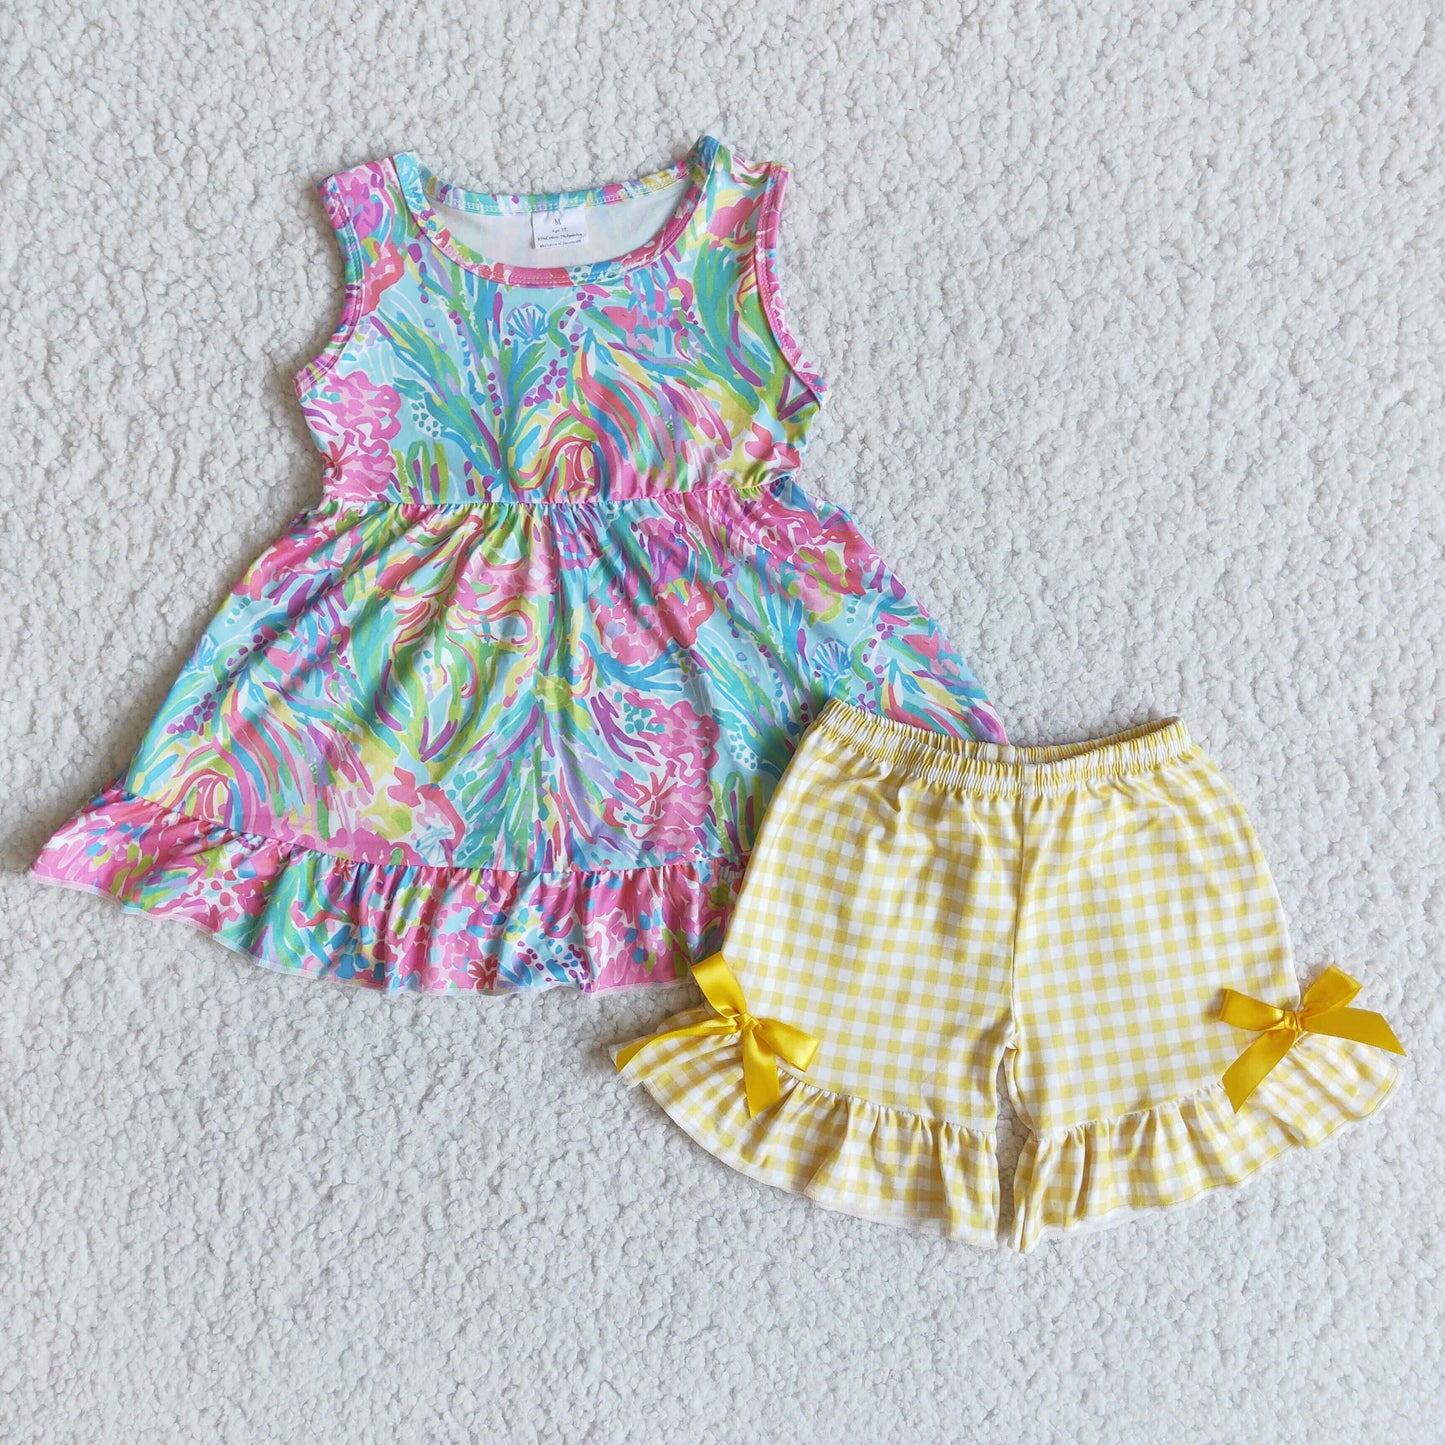 lilytop yellow plaid shorts tank outfit